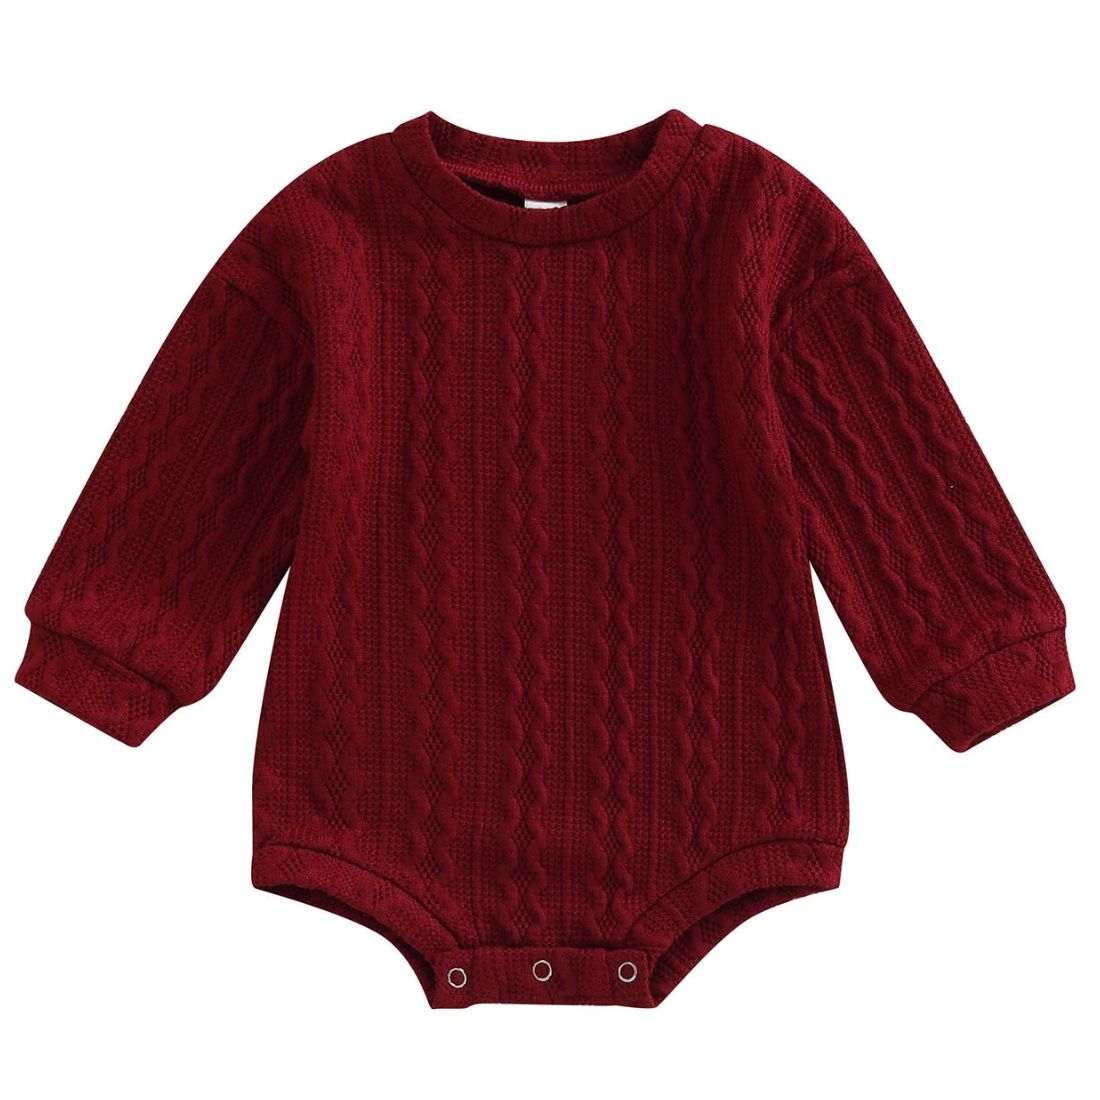 Unisex Baby Long Sleeve Braid Knit Bodysuit - My Trendy Youngsters | Buy on-trend and stylish Baby and Toddler Onesies and bodysuits @ My Trendy Youngsters - Dress your little one in Style @ My Trendy Youngsters 